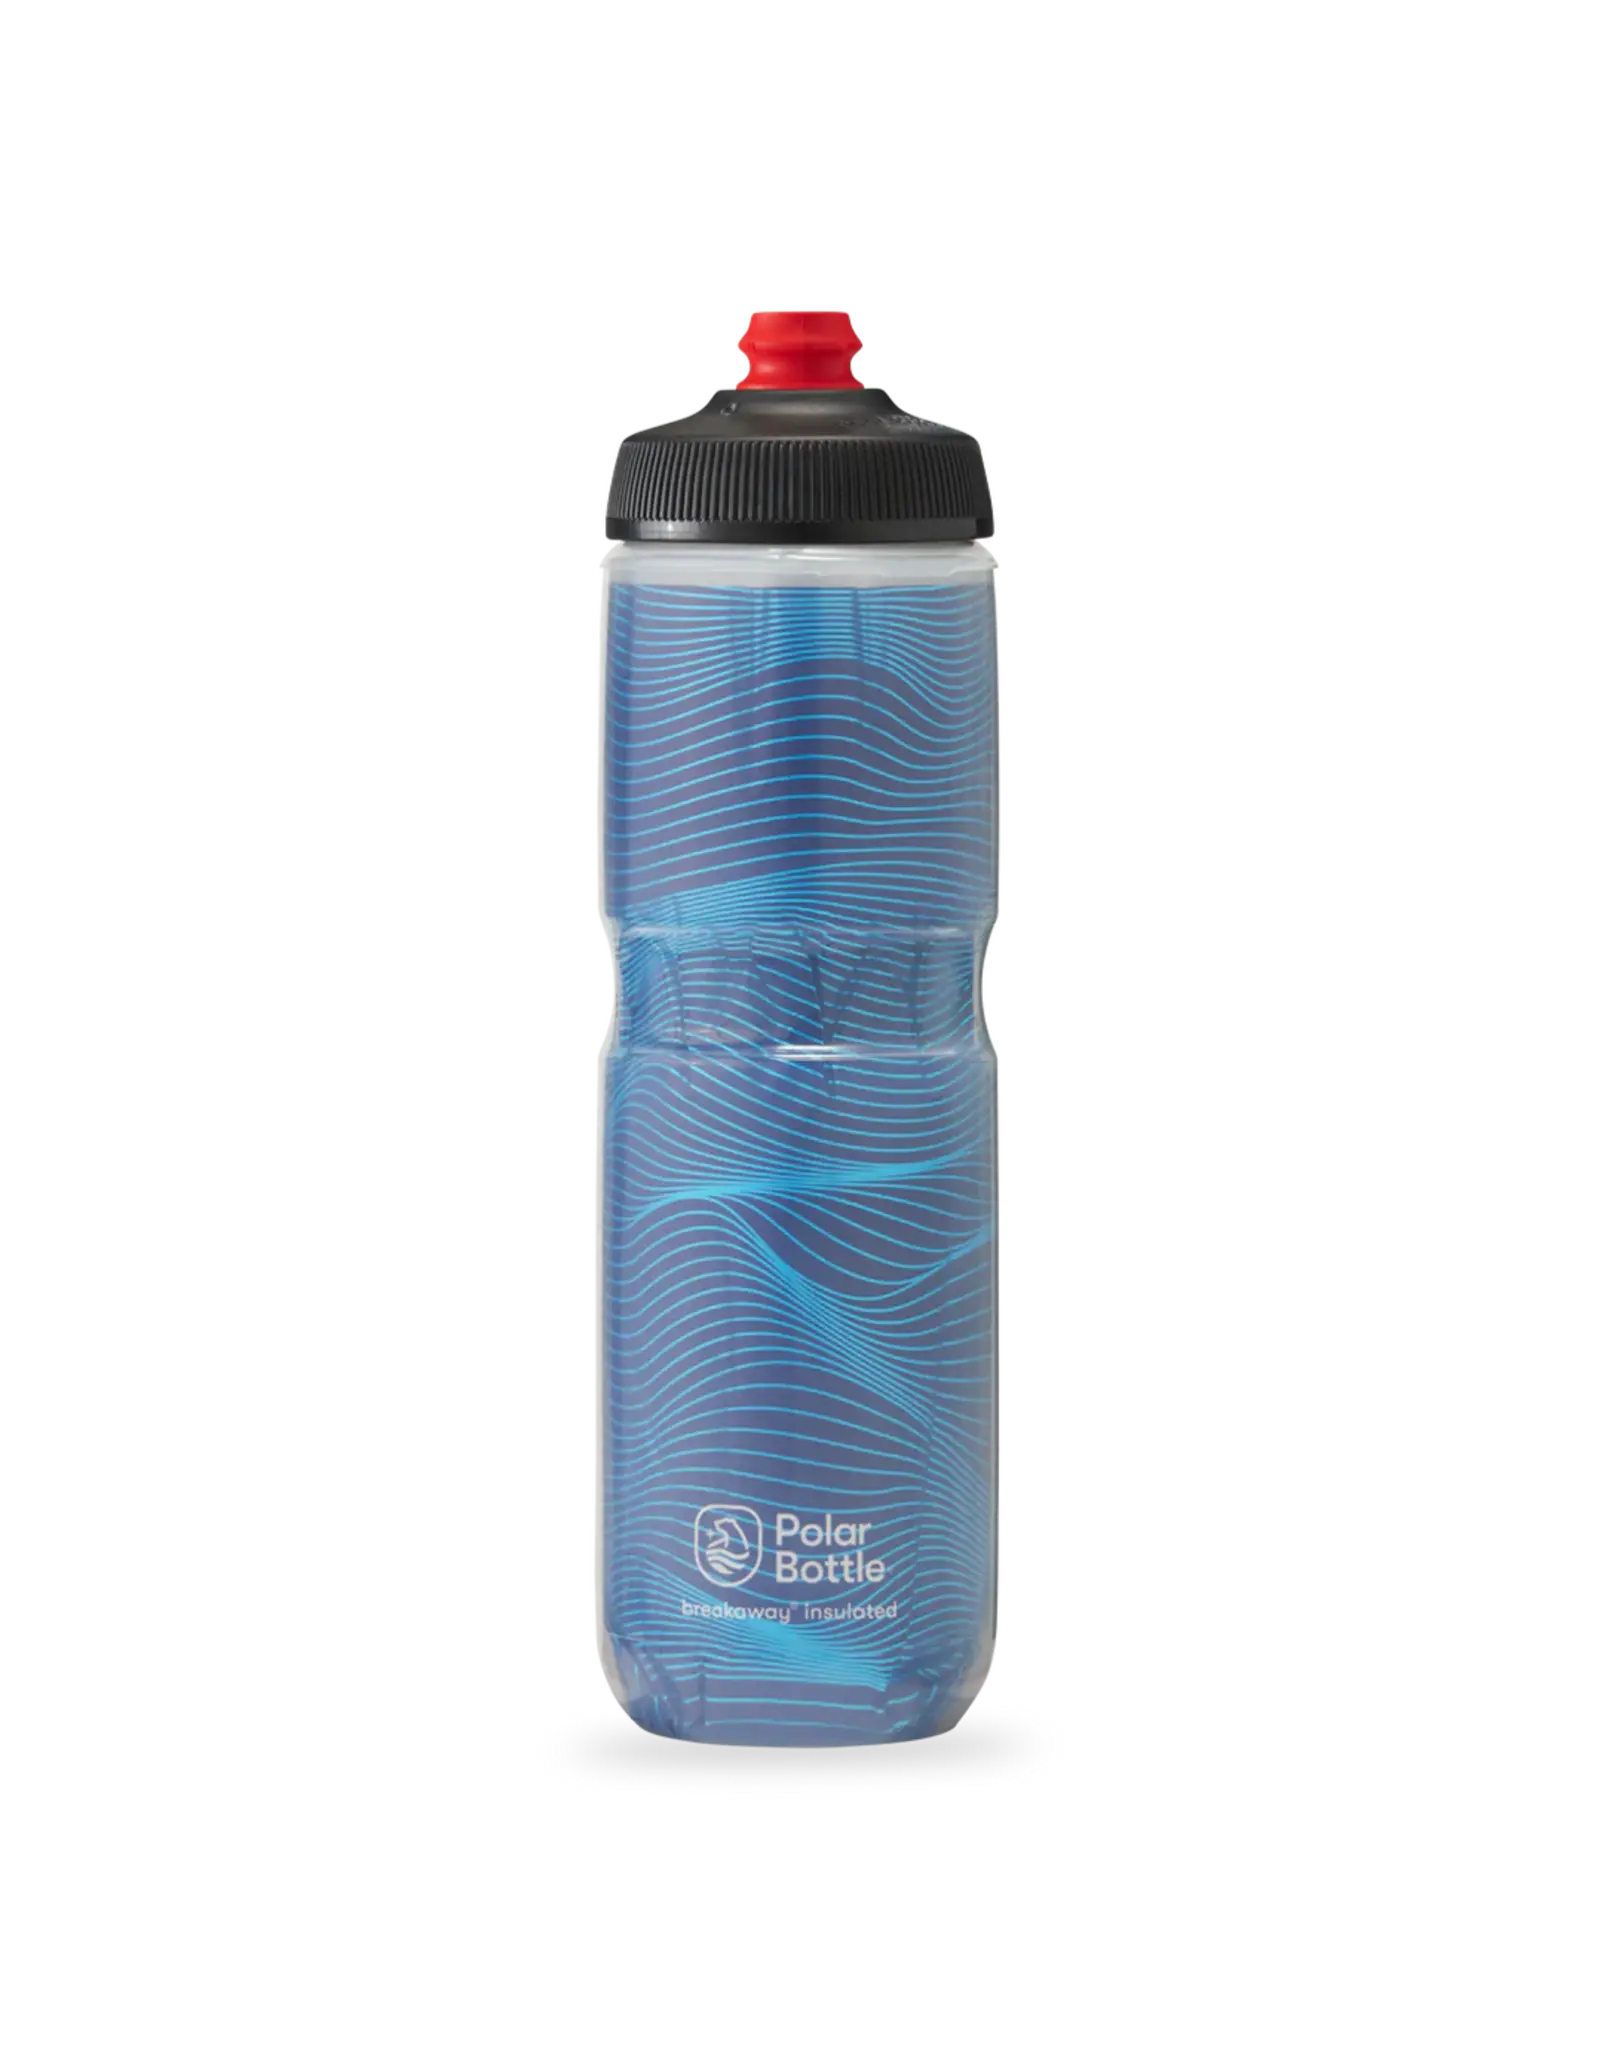 POLAR BOTTLE INSULATED SQUEEZE BOTTLE - JERSEY KNIT BLUE